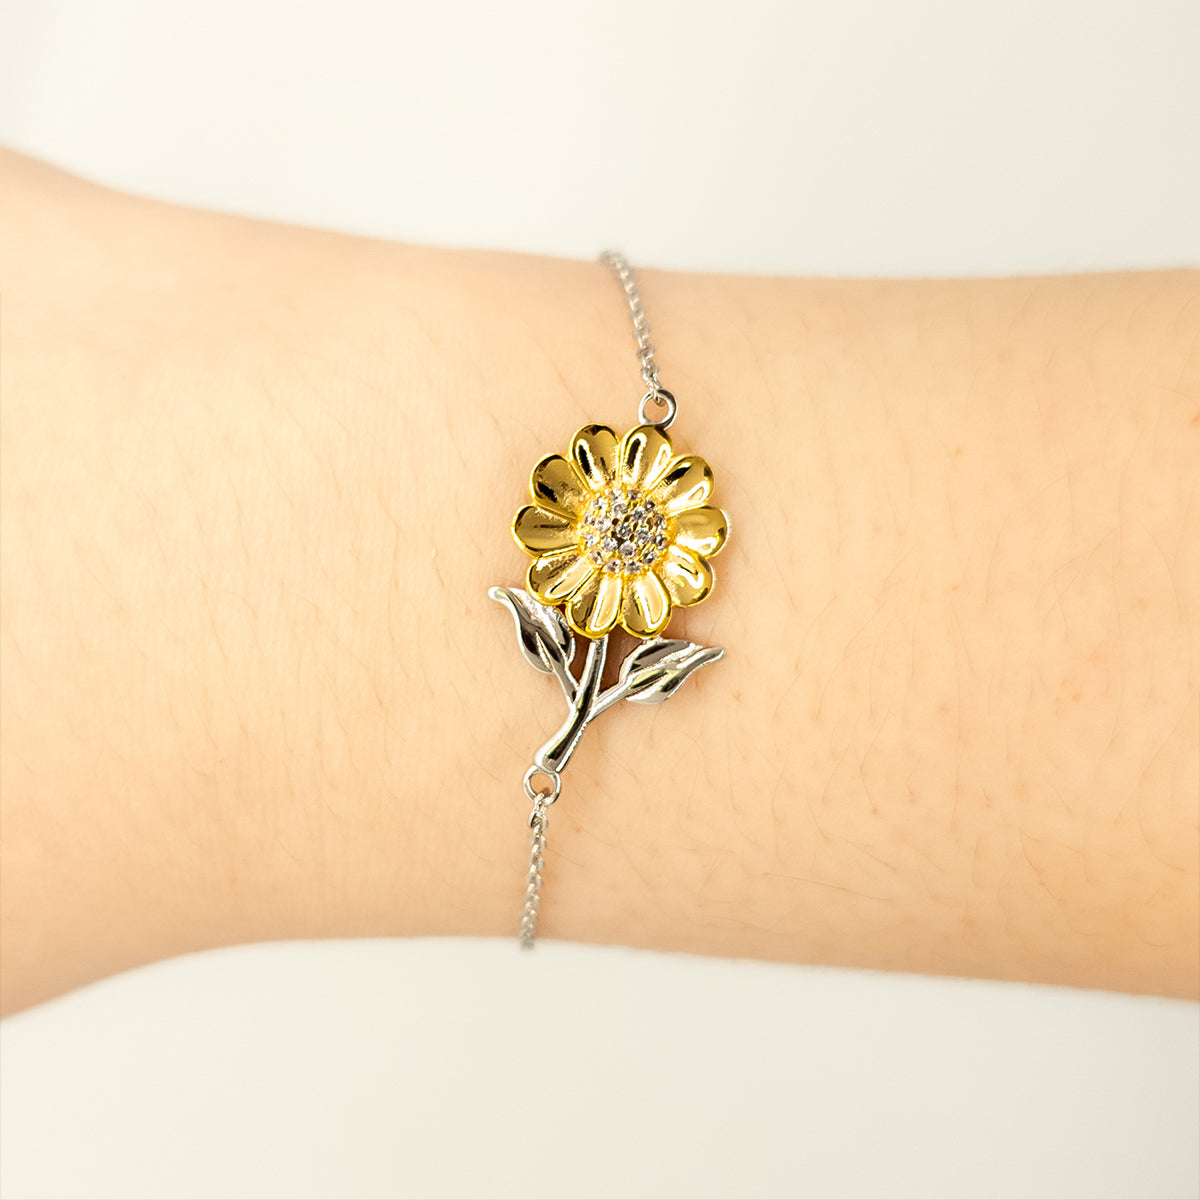 Funny Yoga Instructor Mom Gifts, The best kind of MOM raises Yoga Instructor, Birthday, Mother's Day, Cute Sunflower Bracelet for Yoga Instructor Mom